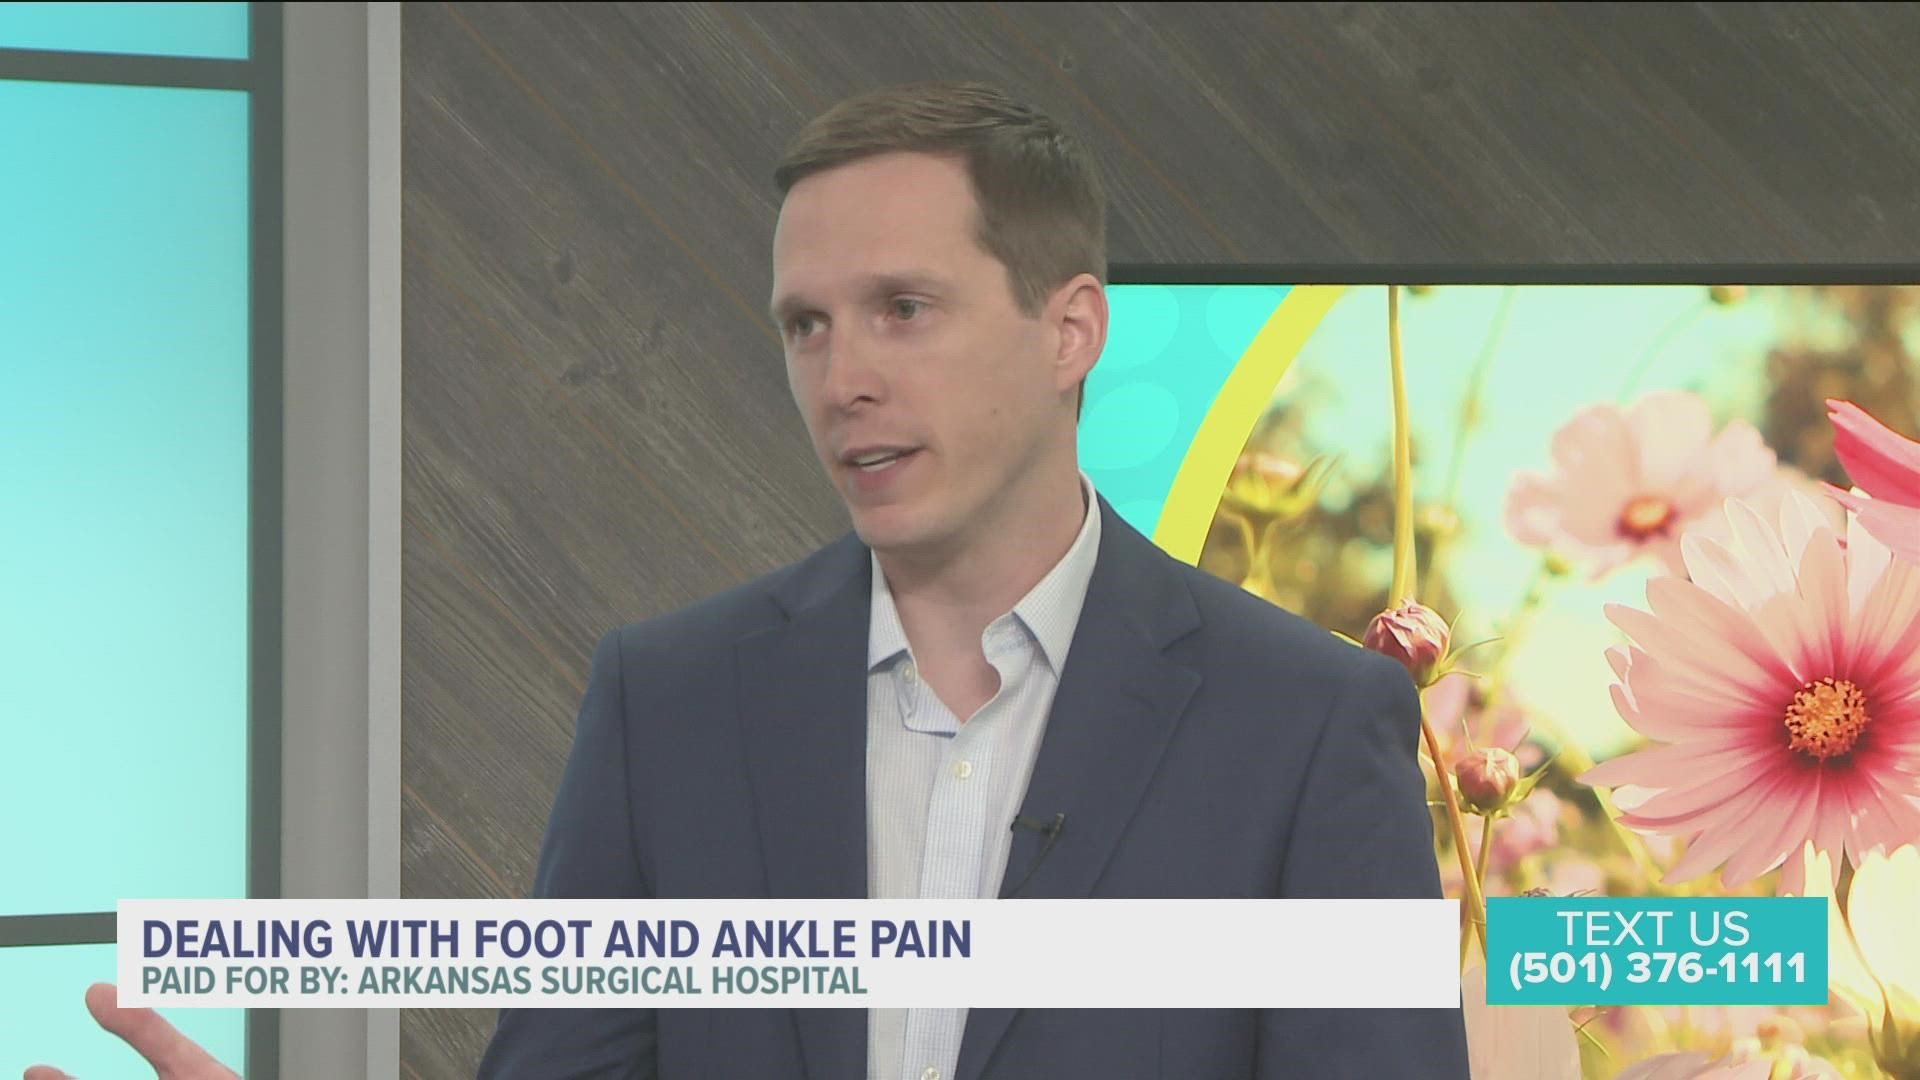 So when should you be concerned about your foot and ankle pain?  Sometimes it's hard to tell.  Your pain might indicate something significant that you've ignored.